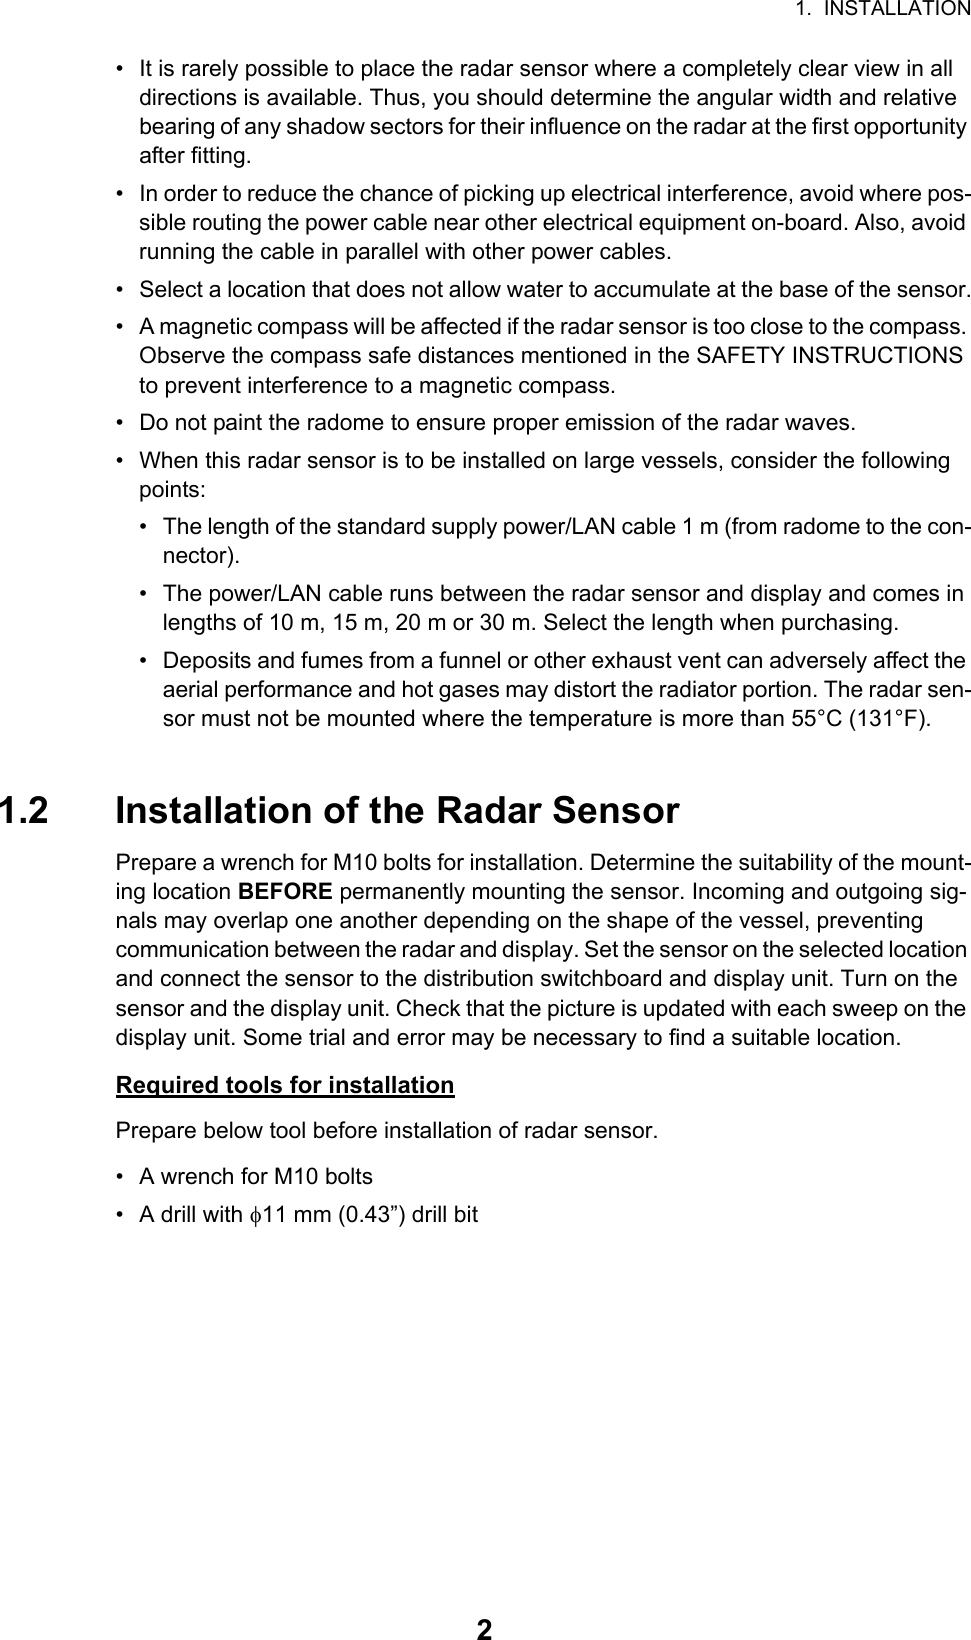 1.  INSTALLATION2•  It is rarely possible to place the radar sensor where a completely clear view in all directions is available. Thus, you should determine the angular width and relative bearing of any shadow sectors for their influence on the radar at the first opportunity after fitting.•  In order to reduce the chance of picking up electrical interference, avoid where pos-sible routing the power cable near other electrical equipment on-board. Also, avoid running the cable in parallel with other power cables.•  Select a location that does not allow water to accumulate at the base of the sensor.•  A magnetic compass will be affected if the radar sensor is too close to the compass. Observe the compass safe distances mentioned in the SAFETY INSTRUCTIONS to prevent interference to a magnetic compass.•  Do not paint the radome to ensure proper emission of the radar waves.•  When this radar sensor is to be installed on large vessels, consider the following points:•  The length of the standard supply power/LAN cable 1 m (from radome to the con-nector).•  The power/LAN cable runs between the radar sensor and display and comes in lengths of 10 m, 15 m, 20 m or 30 m. Select the length when purchasing.•  Deposits and fumes from a funnel or other exhaust vent can adversely affect the aerial performance and hot gases may distort the radiator portion. The radar sen-sor must not be mounted where the temperature is more than 55°C (131°F).1.2 Installation of the Radar SensorPrepare a wrench for M10 bolts for installation. Determine the suitability of the mount-ing location BEFORE permanently mounting the sensor. Incoming and outgoing sig-nals may overlap one another depending on the shape of the vessel, preventing communication between the radar and display. Set the sensor on the selected location and connect the sensor to the distribution switchboard and display unit. Turn on the sensor and the display unit. Check that the picture is updated with each sweep on the display unit. Some trial and error may be necessary to find a suitable location.Required tools for installationPrepare below tool before installation of radar sensor.•  A wrench for M10 bolts• A drill with 11 mm (0.43”) drill bit